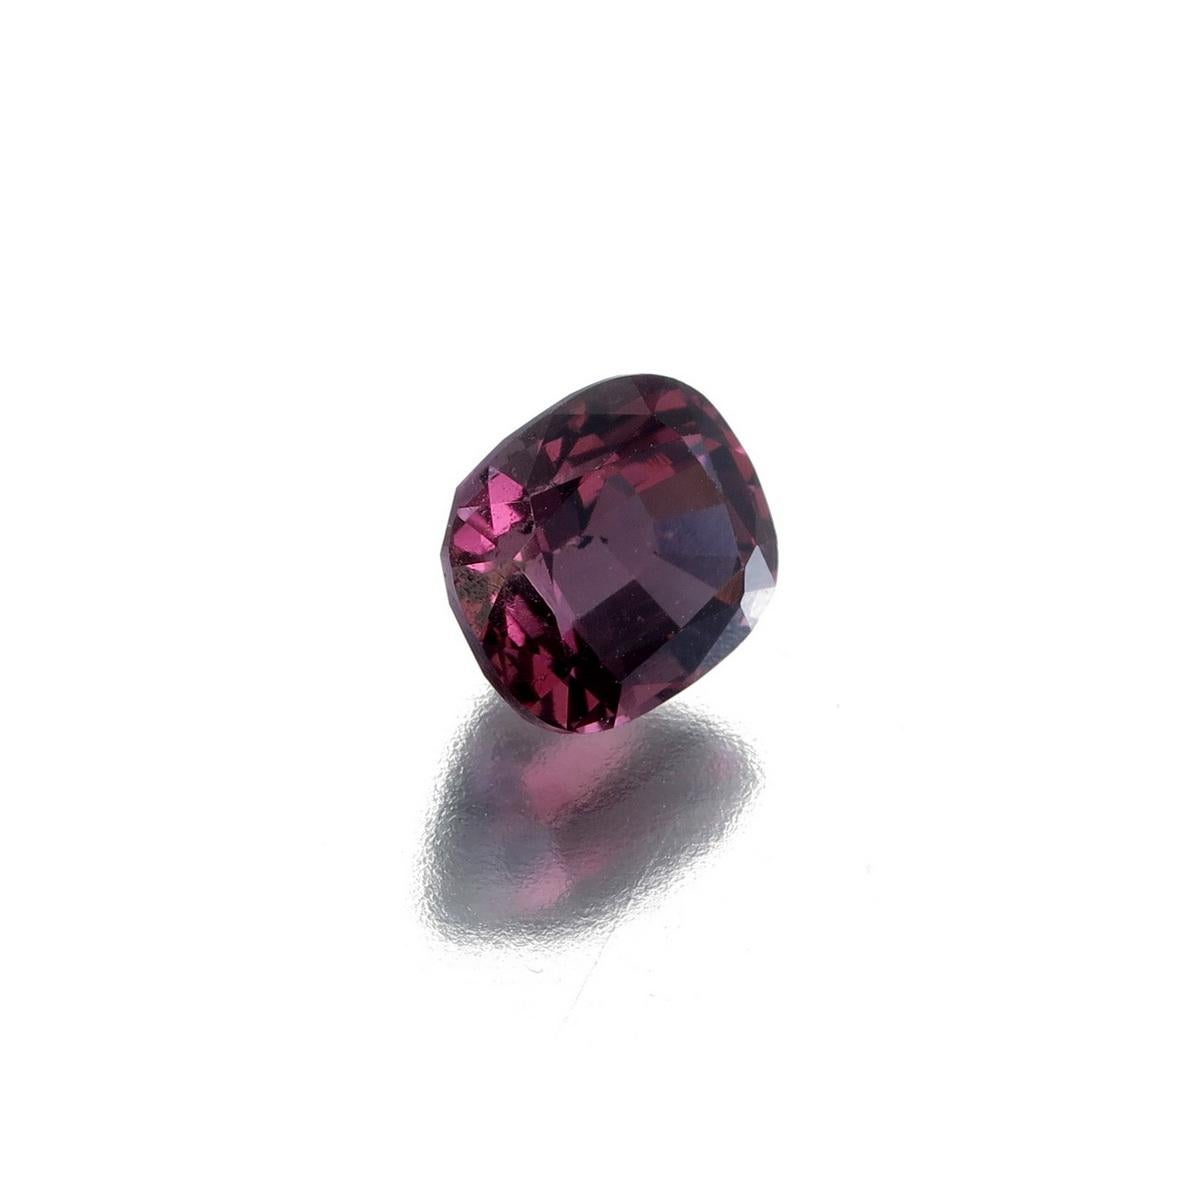 1.88 Carat Natural Vivid Pink Spinel from Burma
Dimension: 7.13 x 6.39 x 4.89  mm
Shape: Cushion Cut
Weight: 1.88 Carat
No eat
GIL Certified Report No: ST2022102151321
